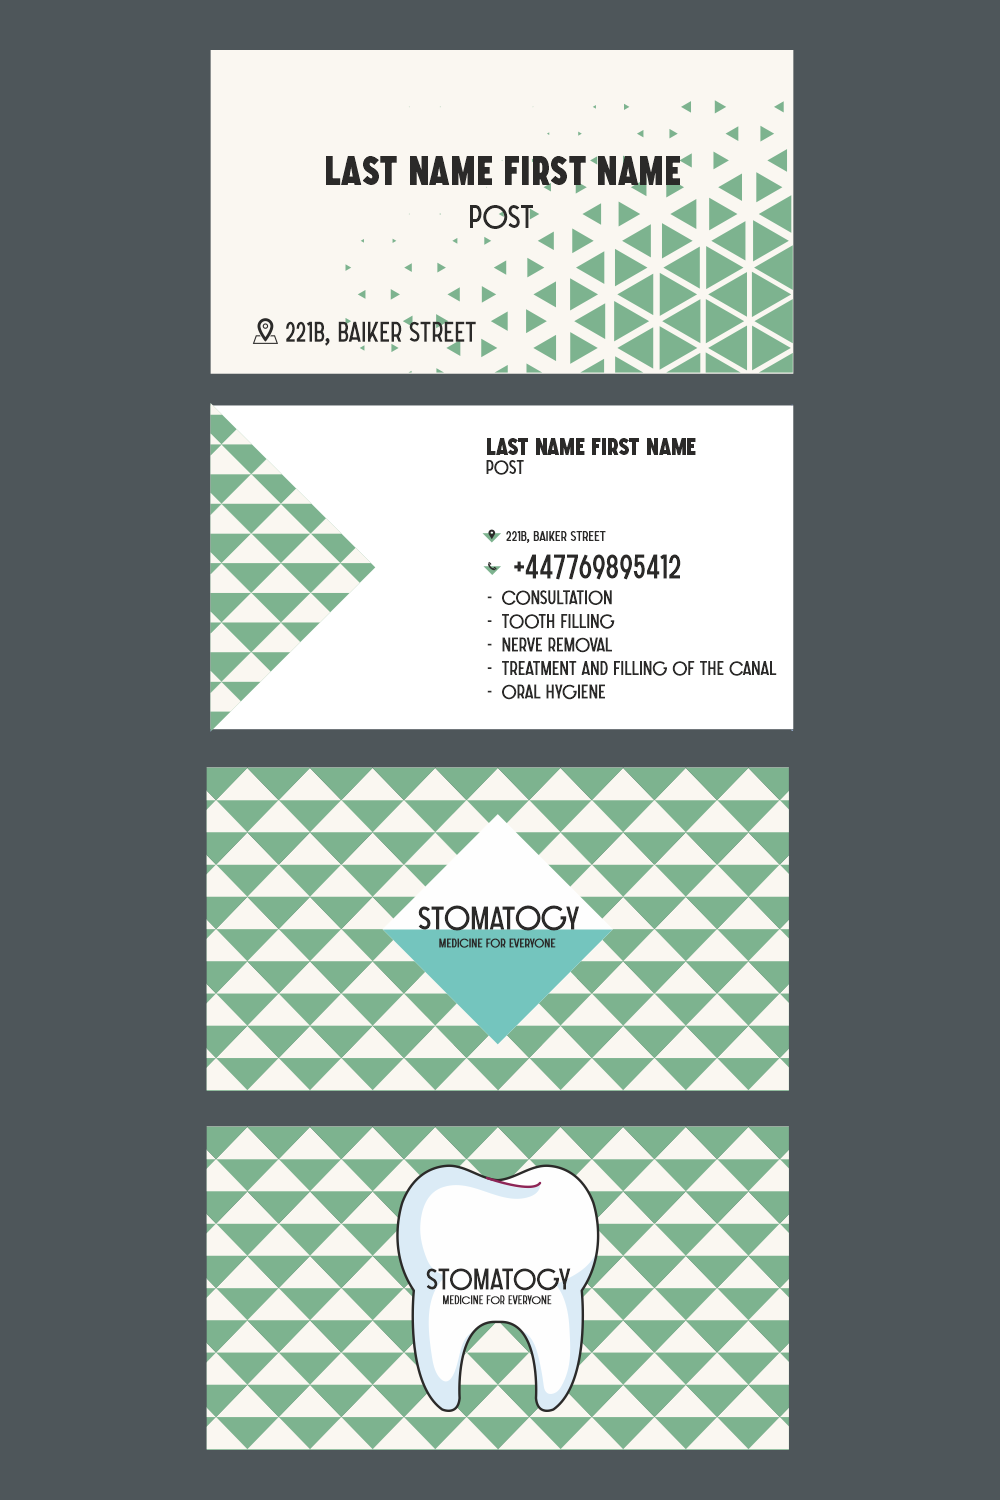 Stomatogy shaped business card pinterest preview image.